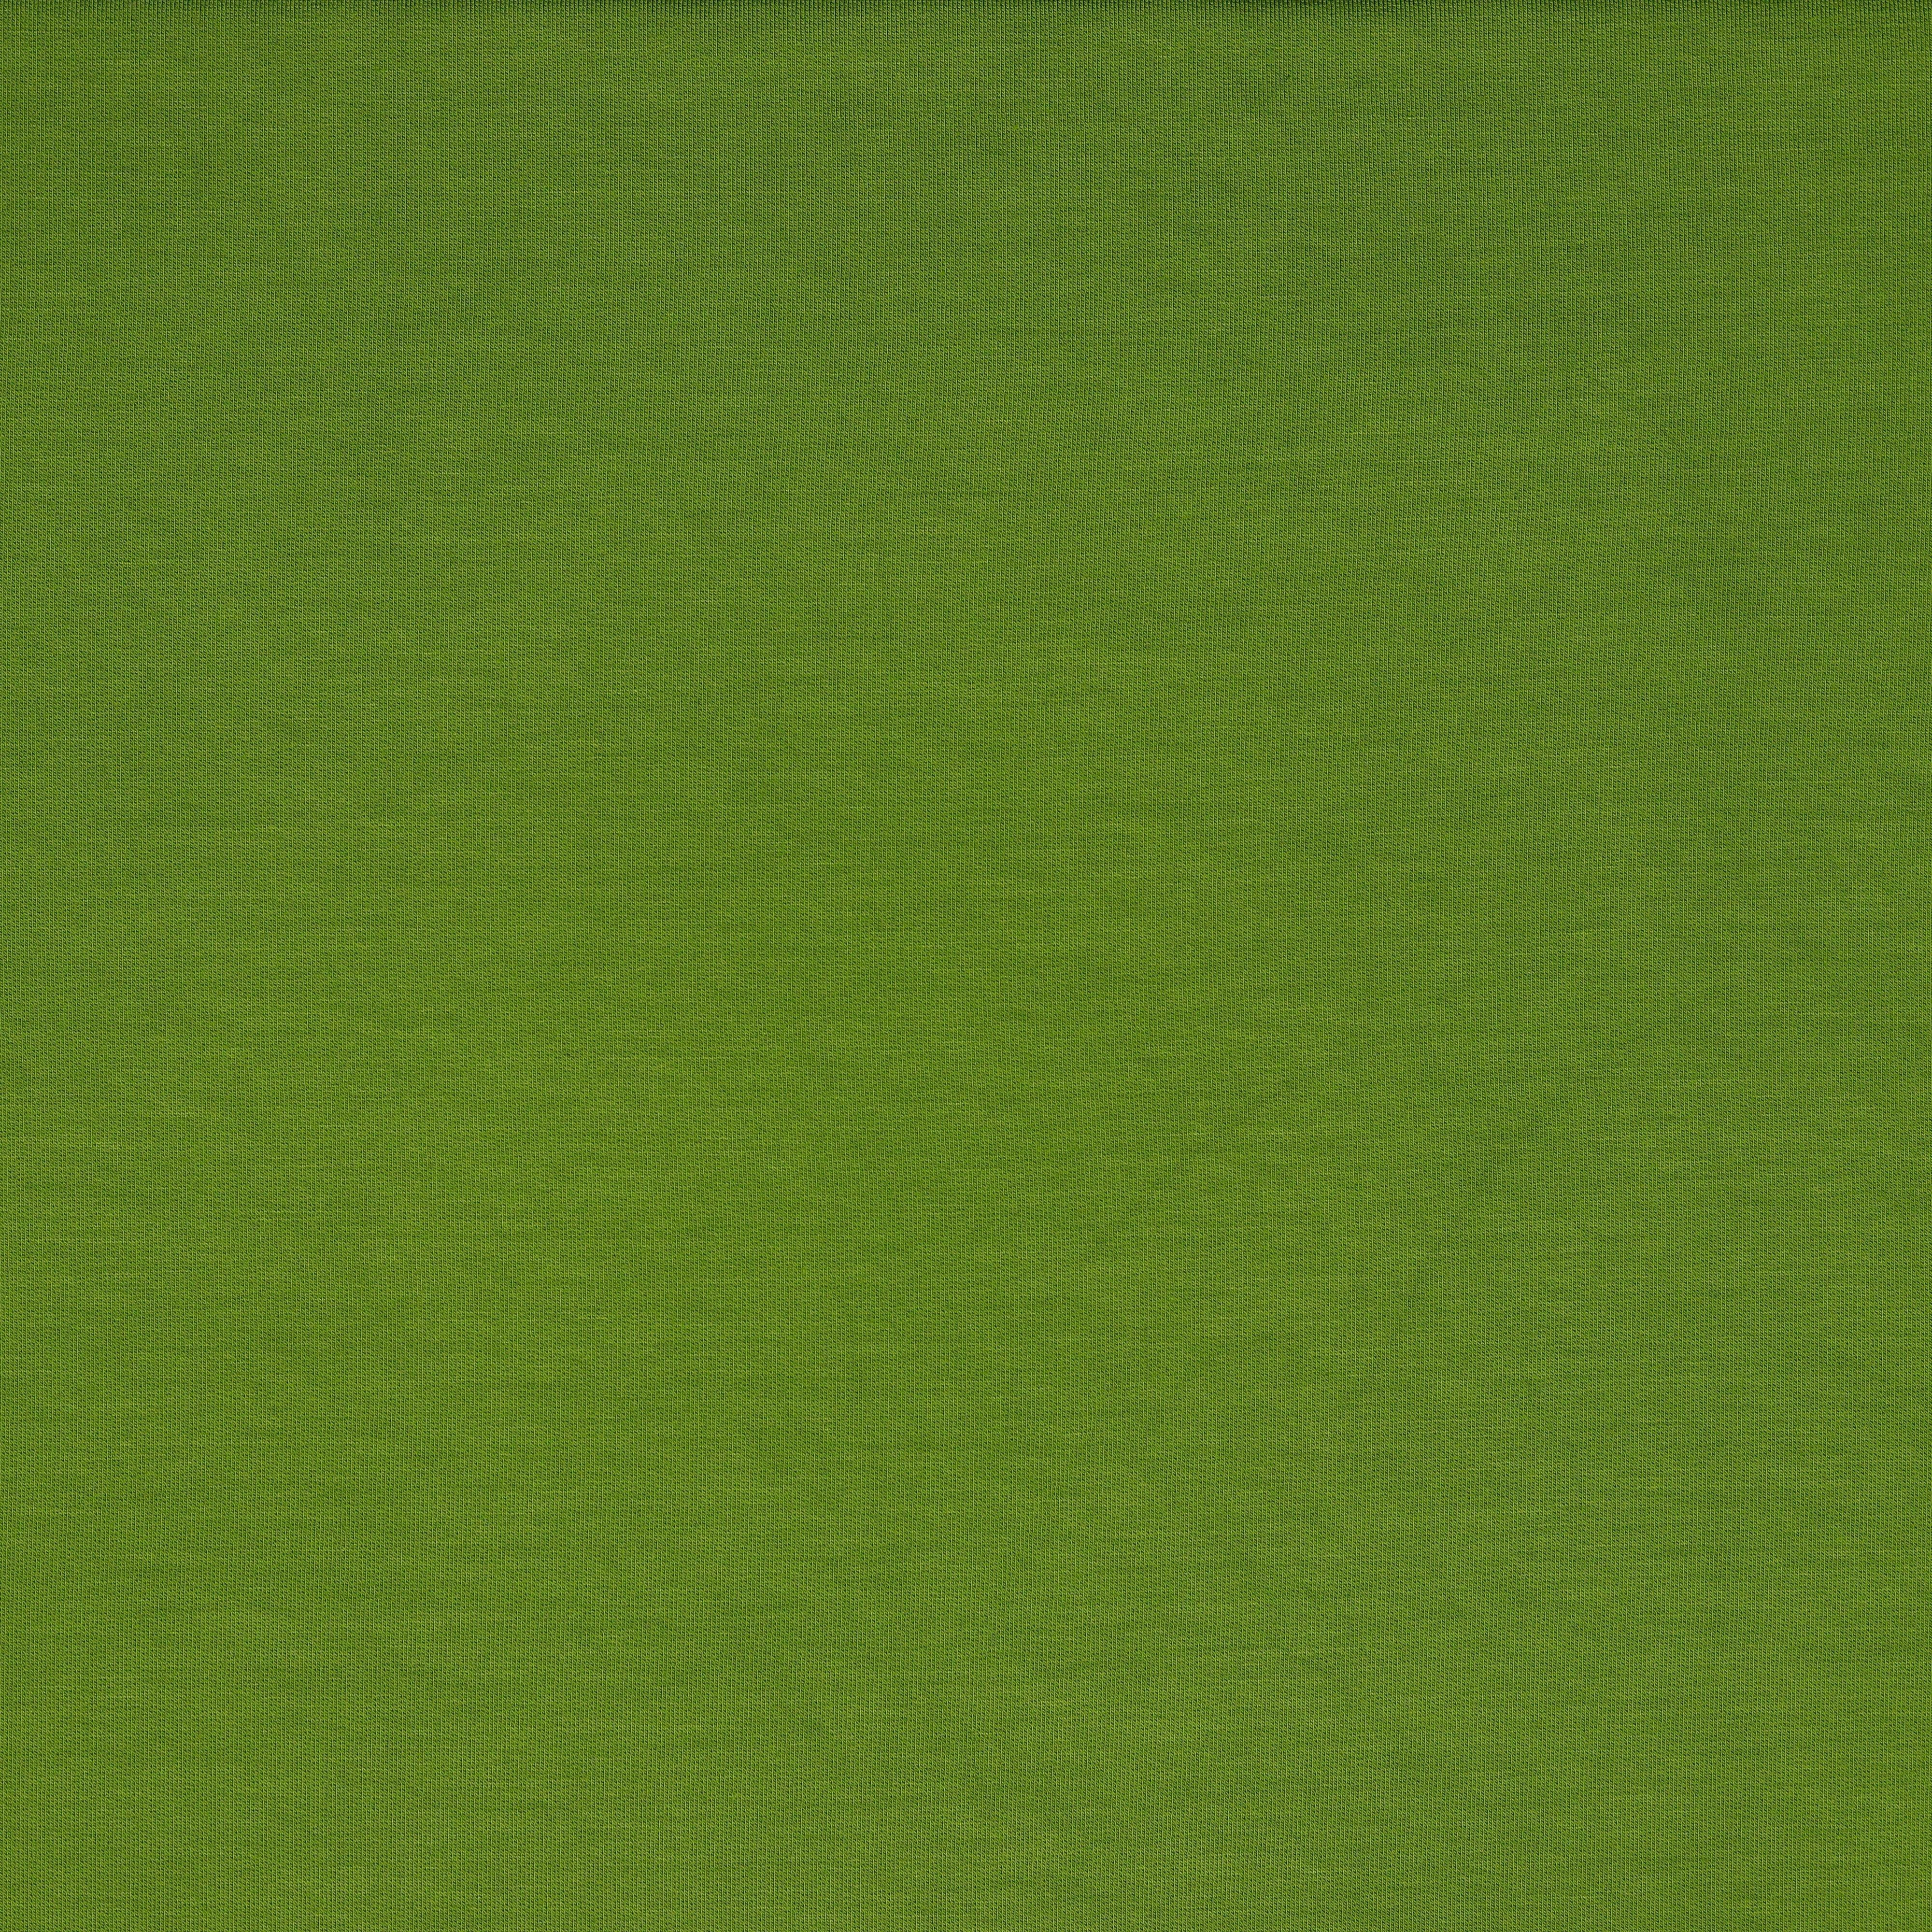 REMNANT 0.57 Metre - Splendour Modal French Terry in Grass Green